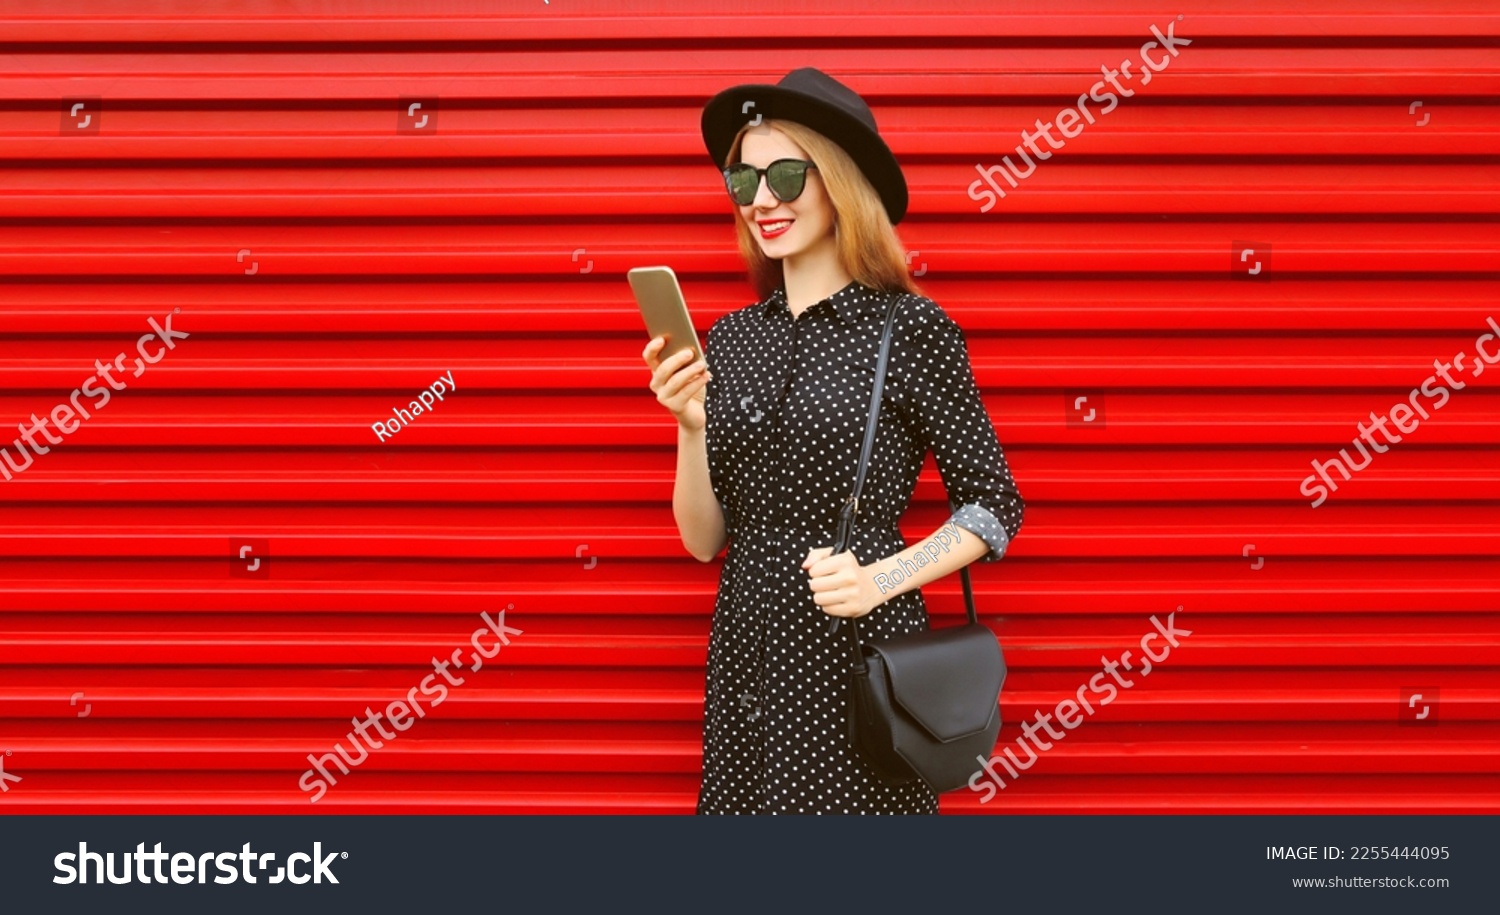 Portrait of stylish smiling woman with smartphone wearing black round hat on red background #2255444095